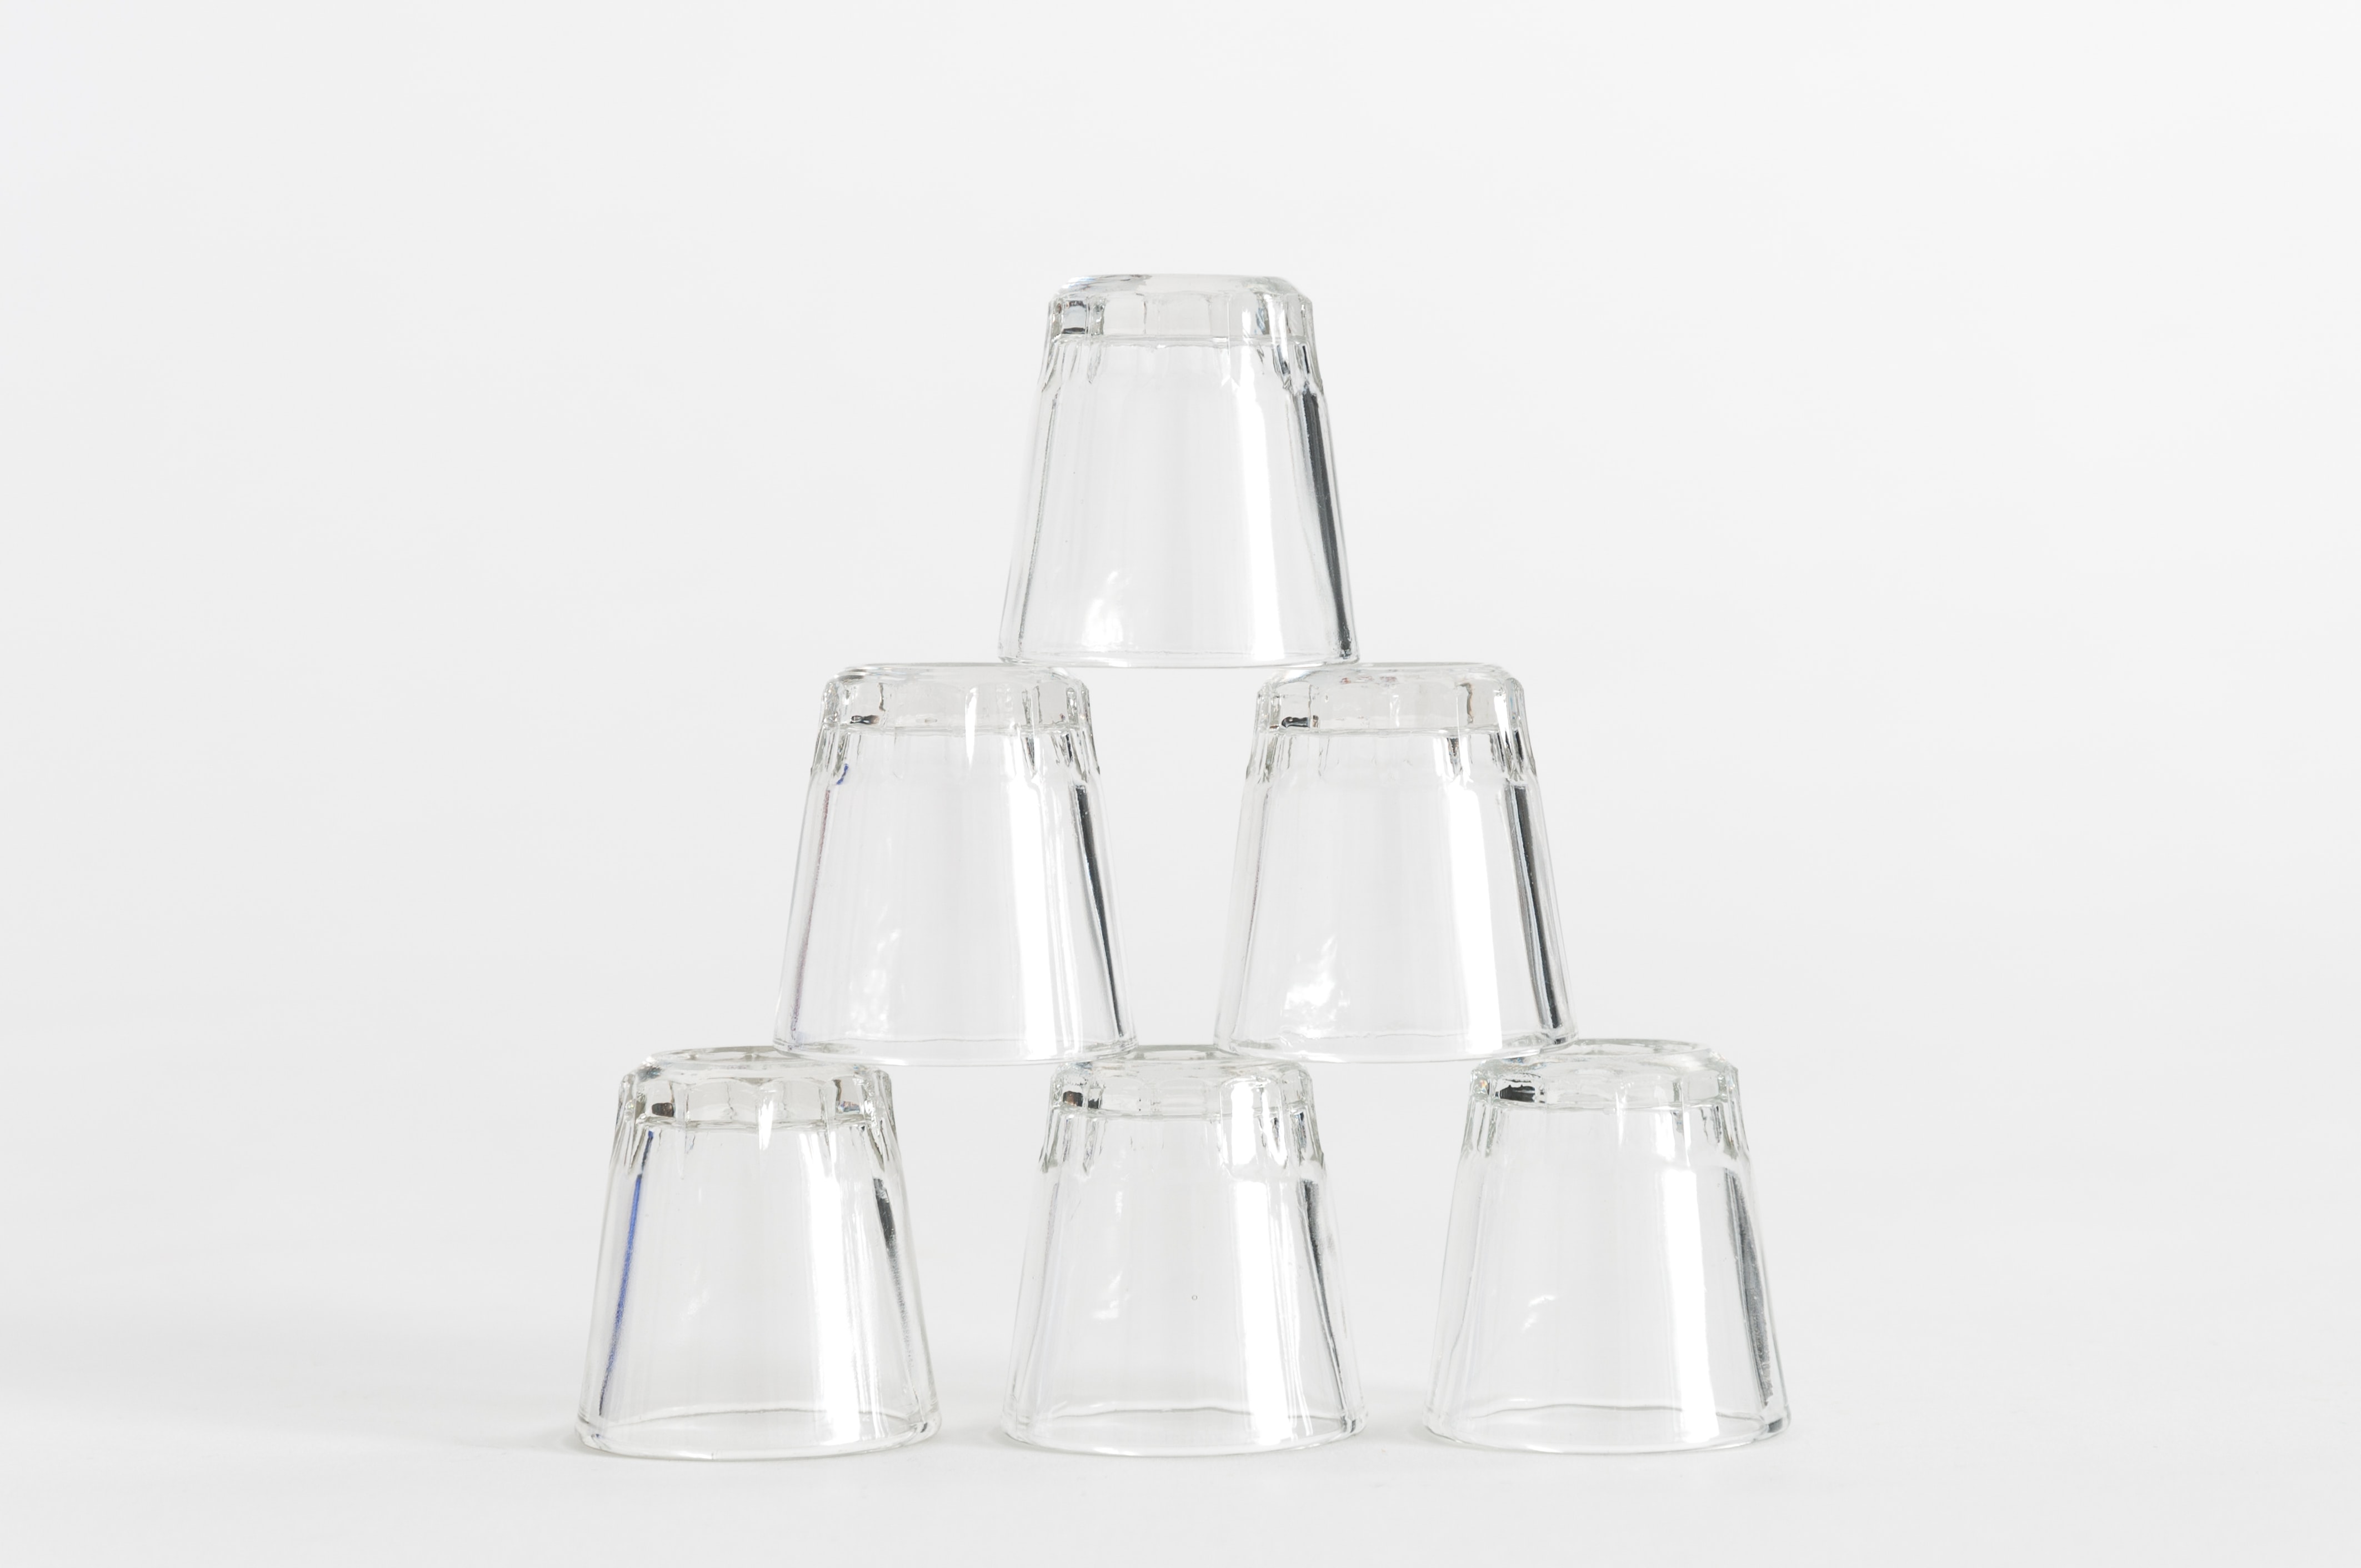 Six glasses in a pyramid to show the concept of clear design